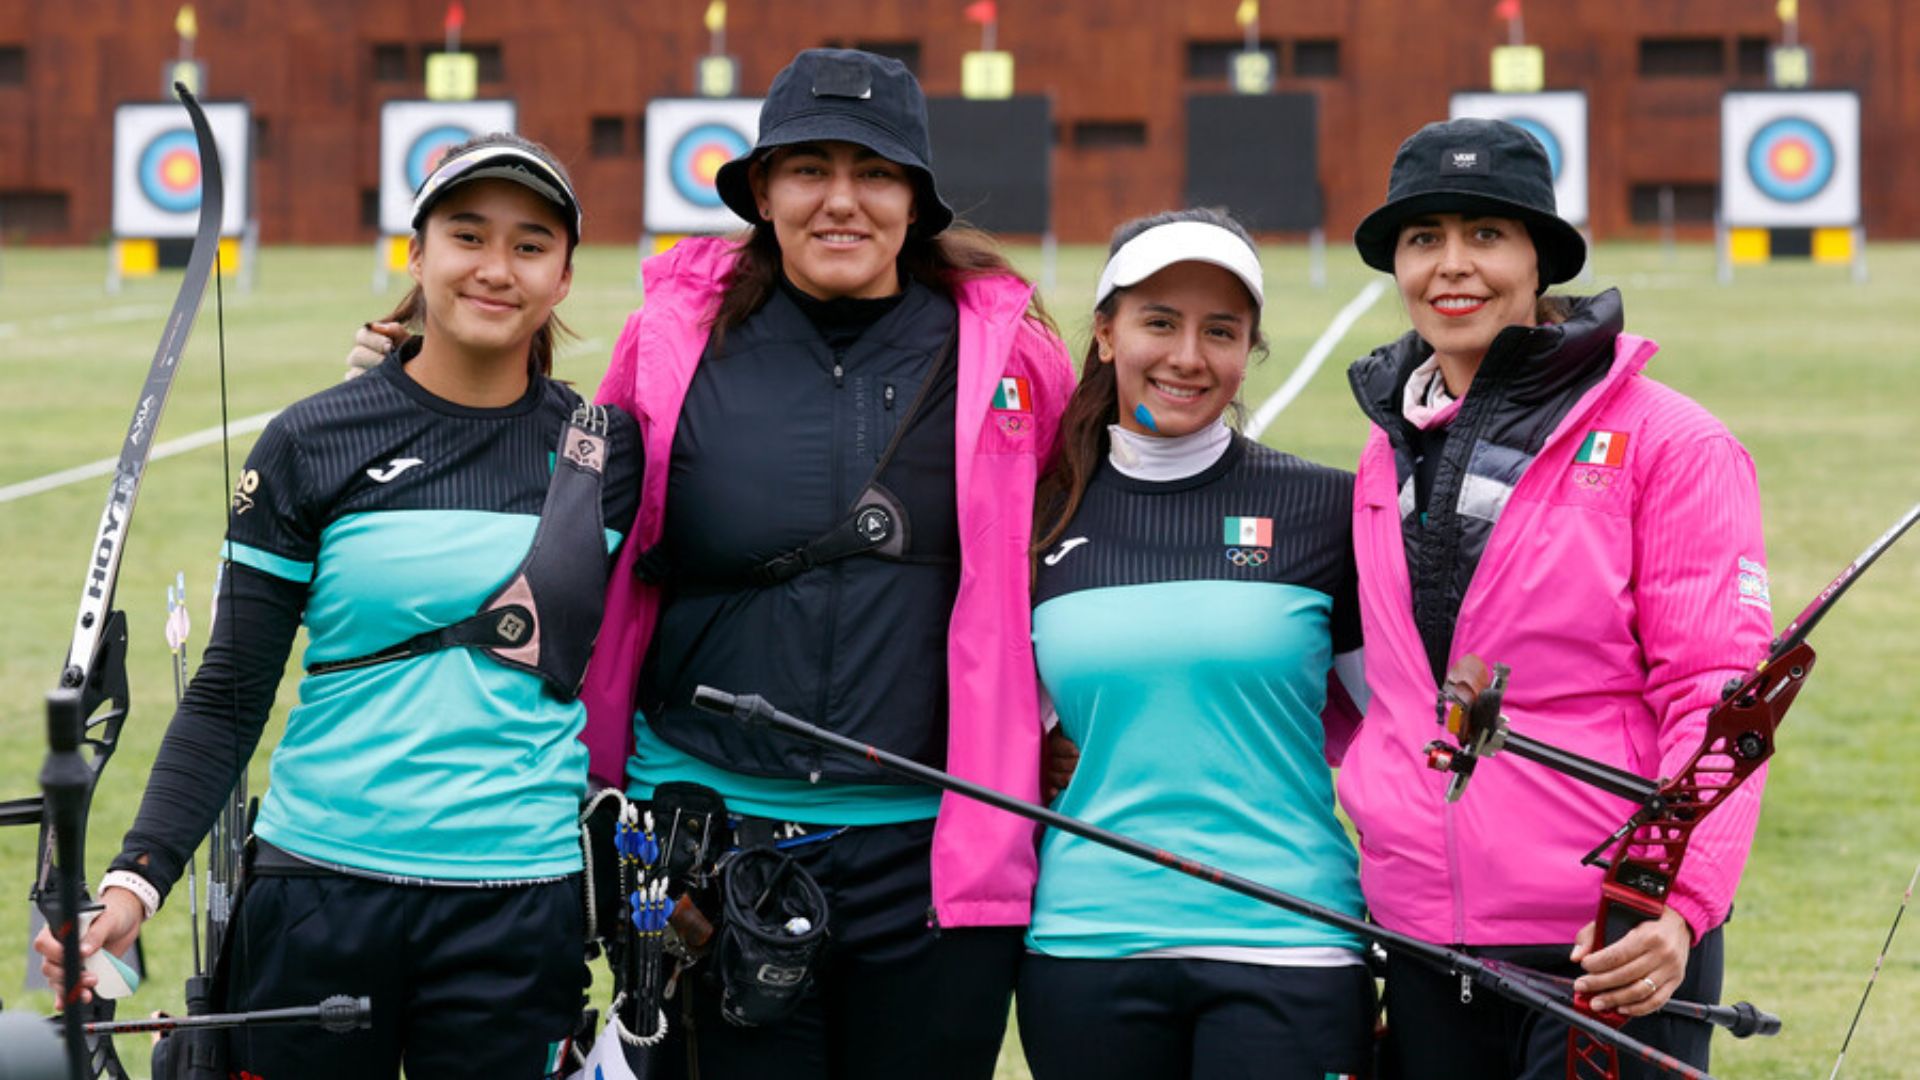 Mexico Sets a Strong Record in Pan American Recurve Archery